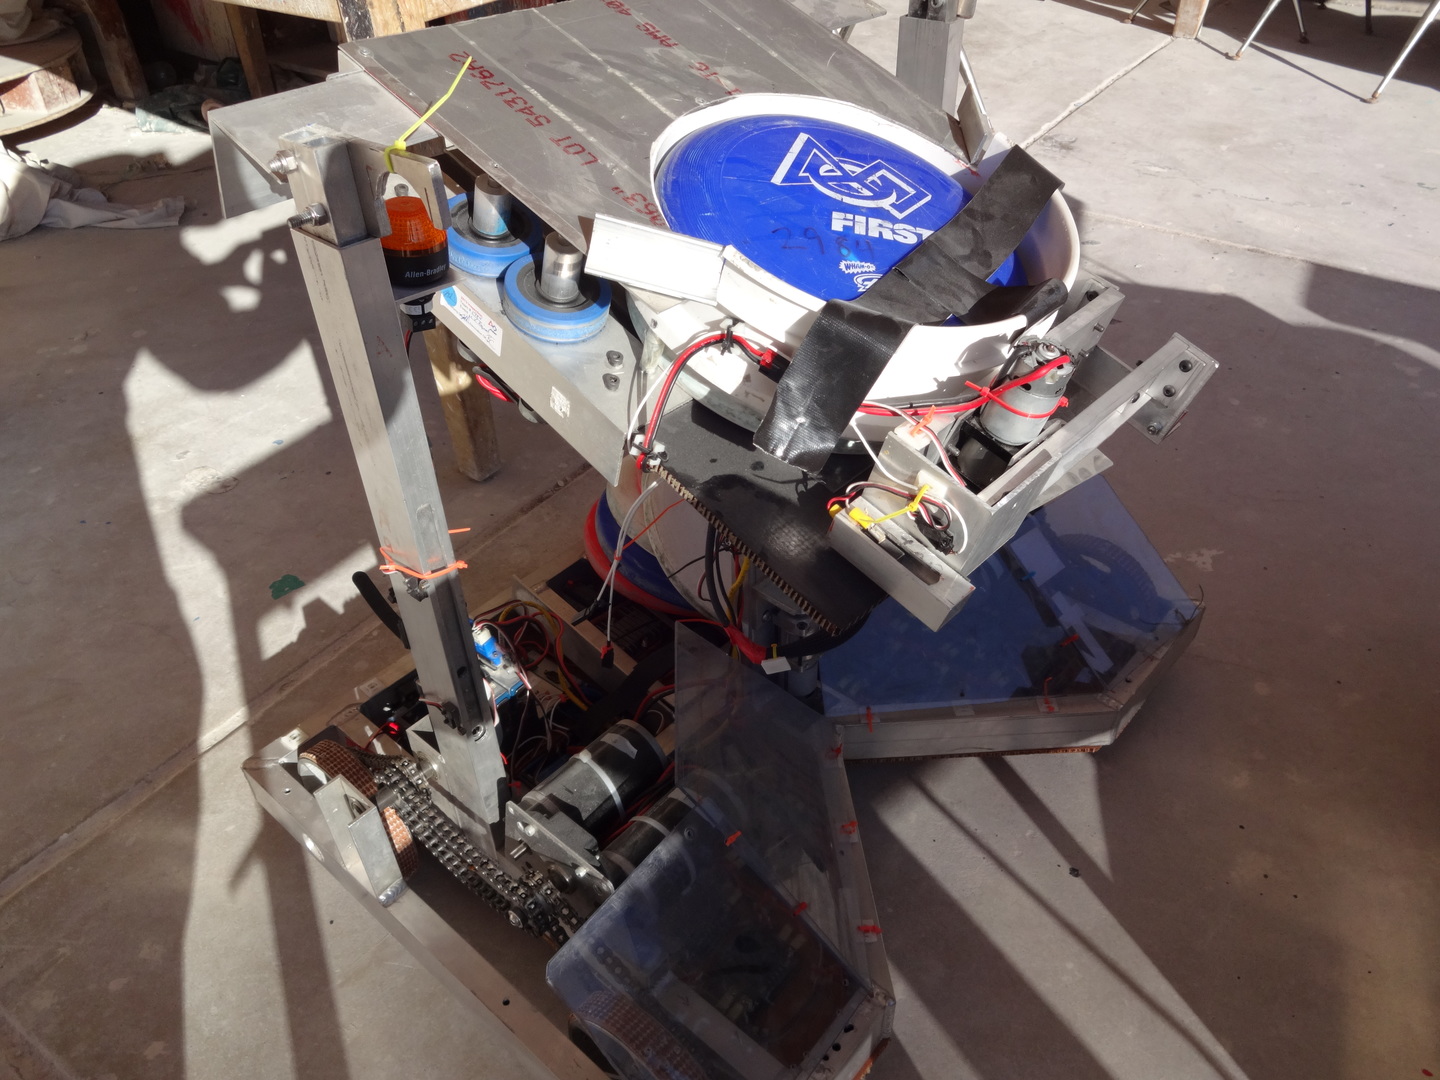 The 2013 Robot after the competitions.